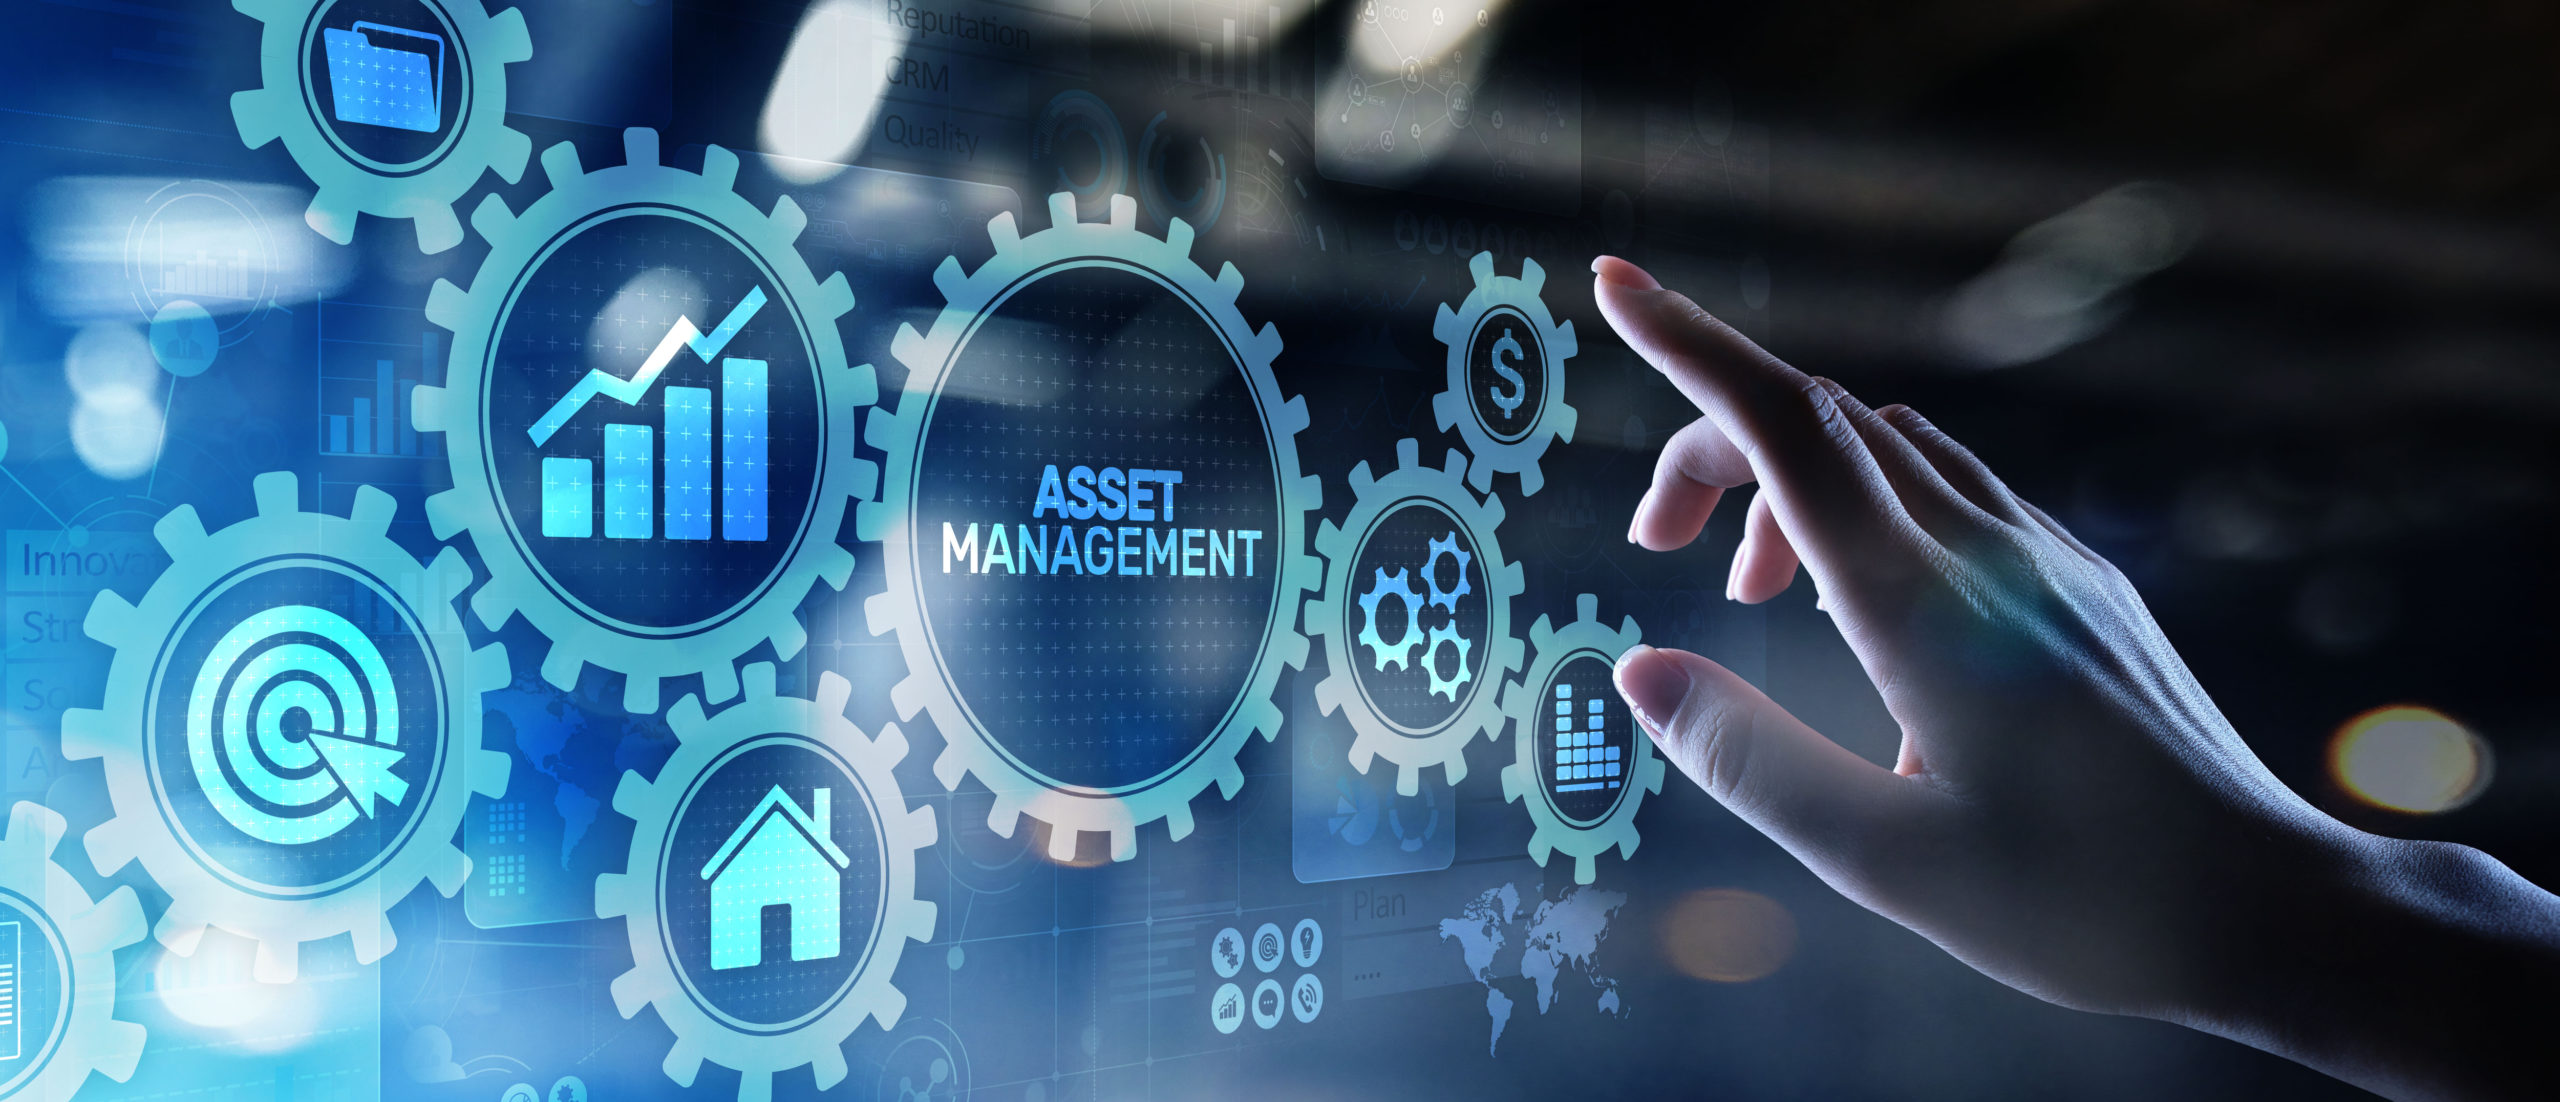 Asset Management University City, MO | Financial Planners | Investment Advisors | Wealth Management